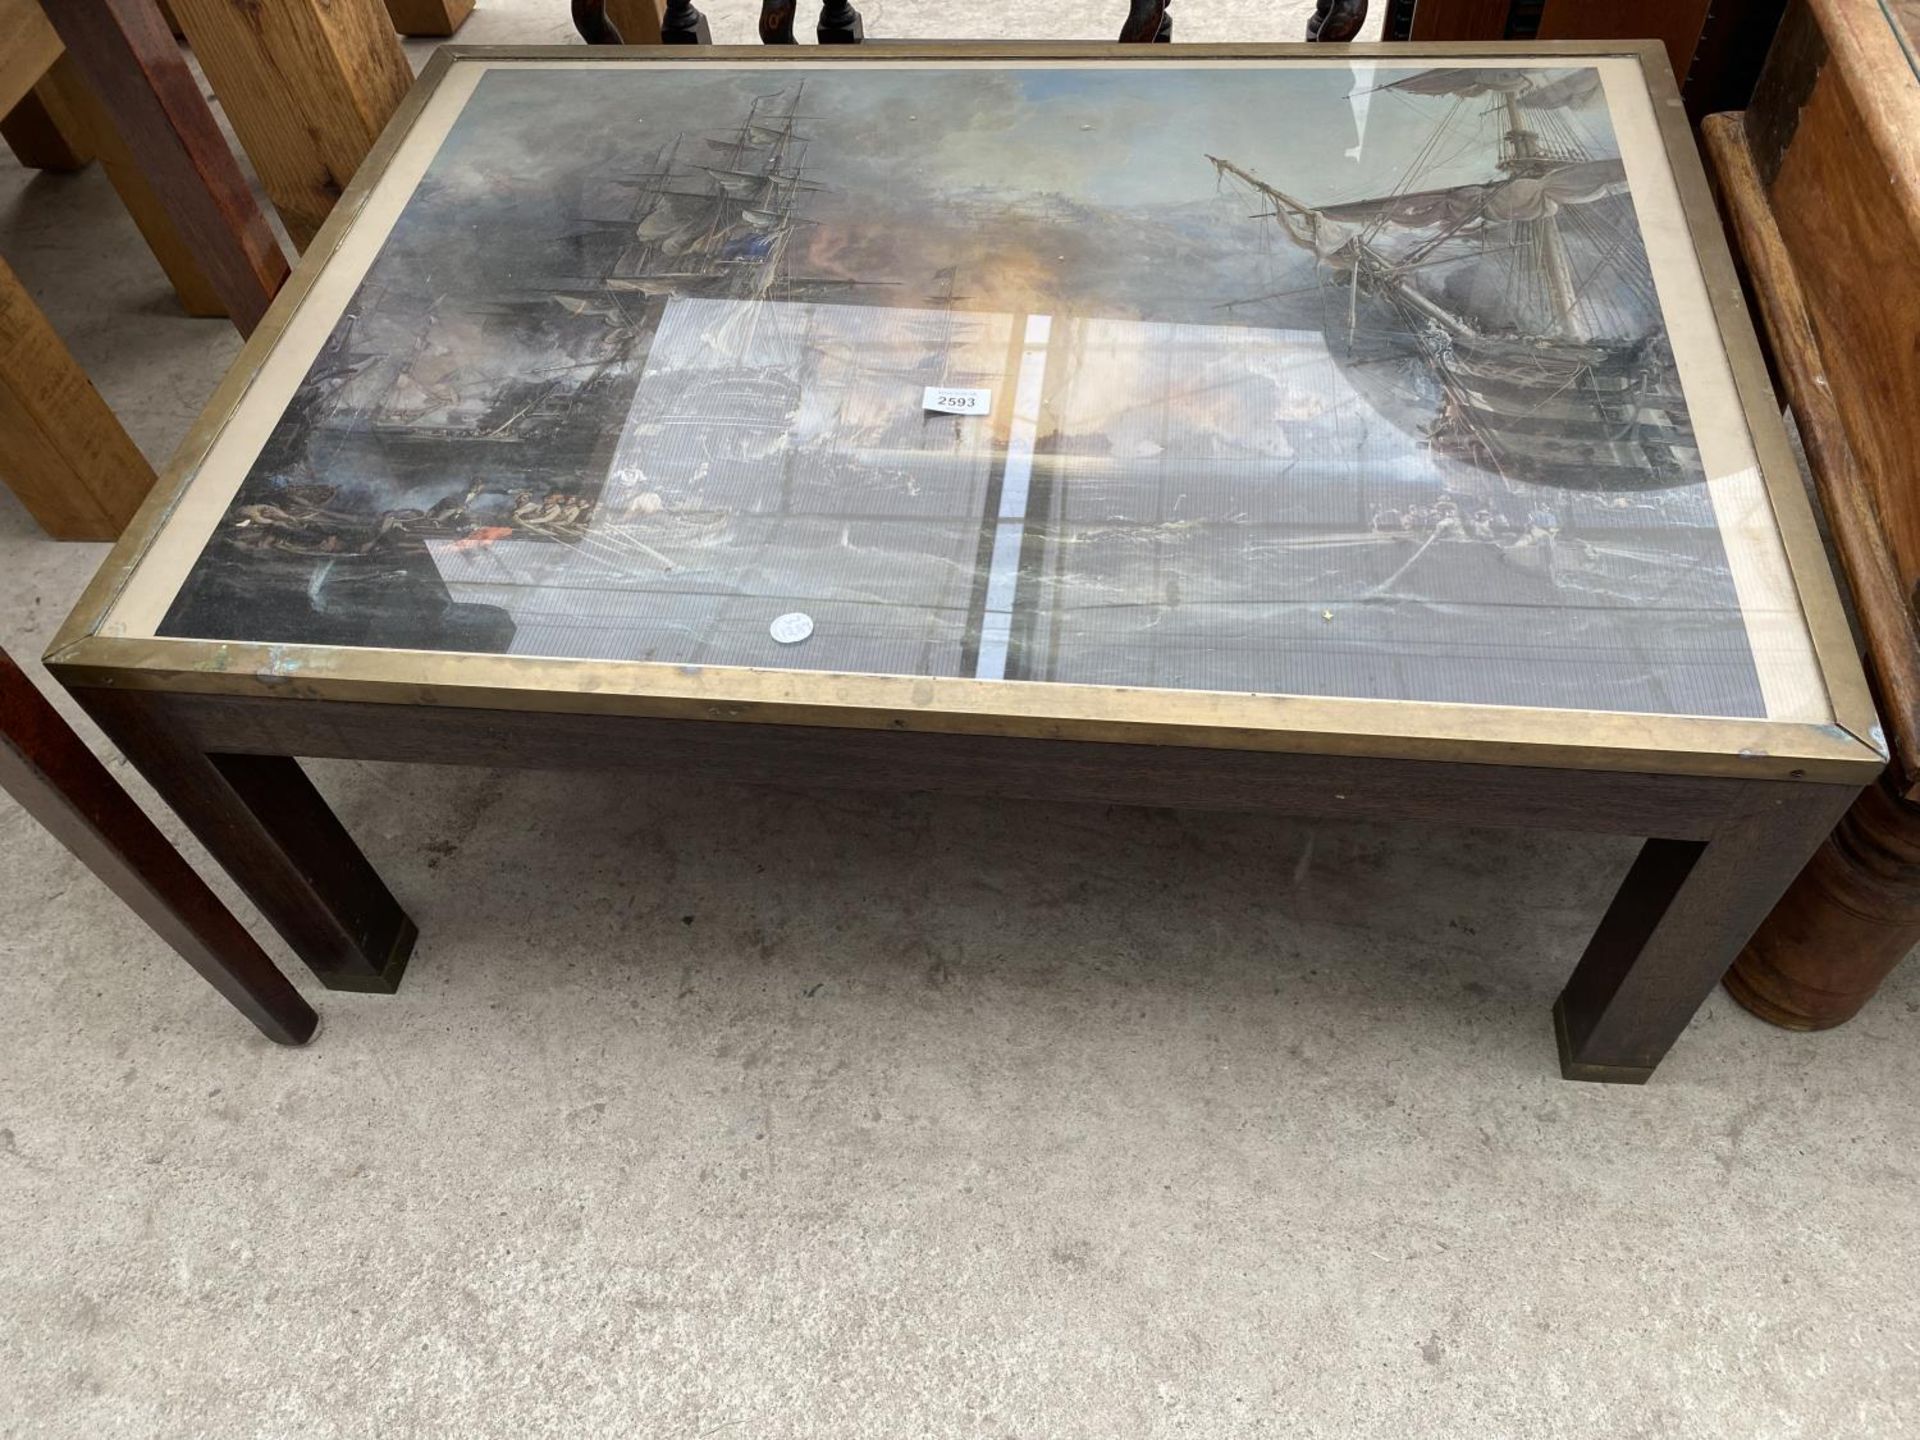 A MODERN COFFEE TABLE WITH BRASS TRIM, THE TOP DEPICTING MASTED BATTLESHIPS, 35X24"